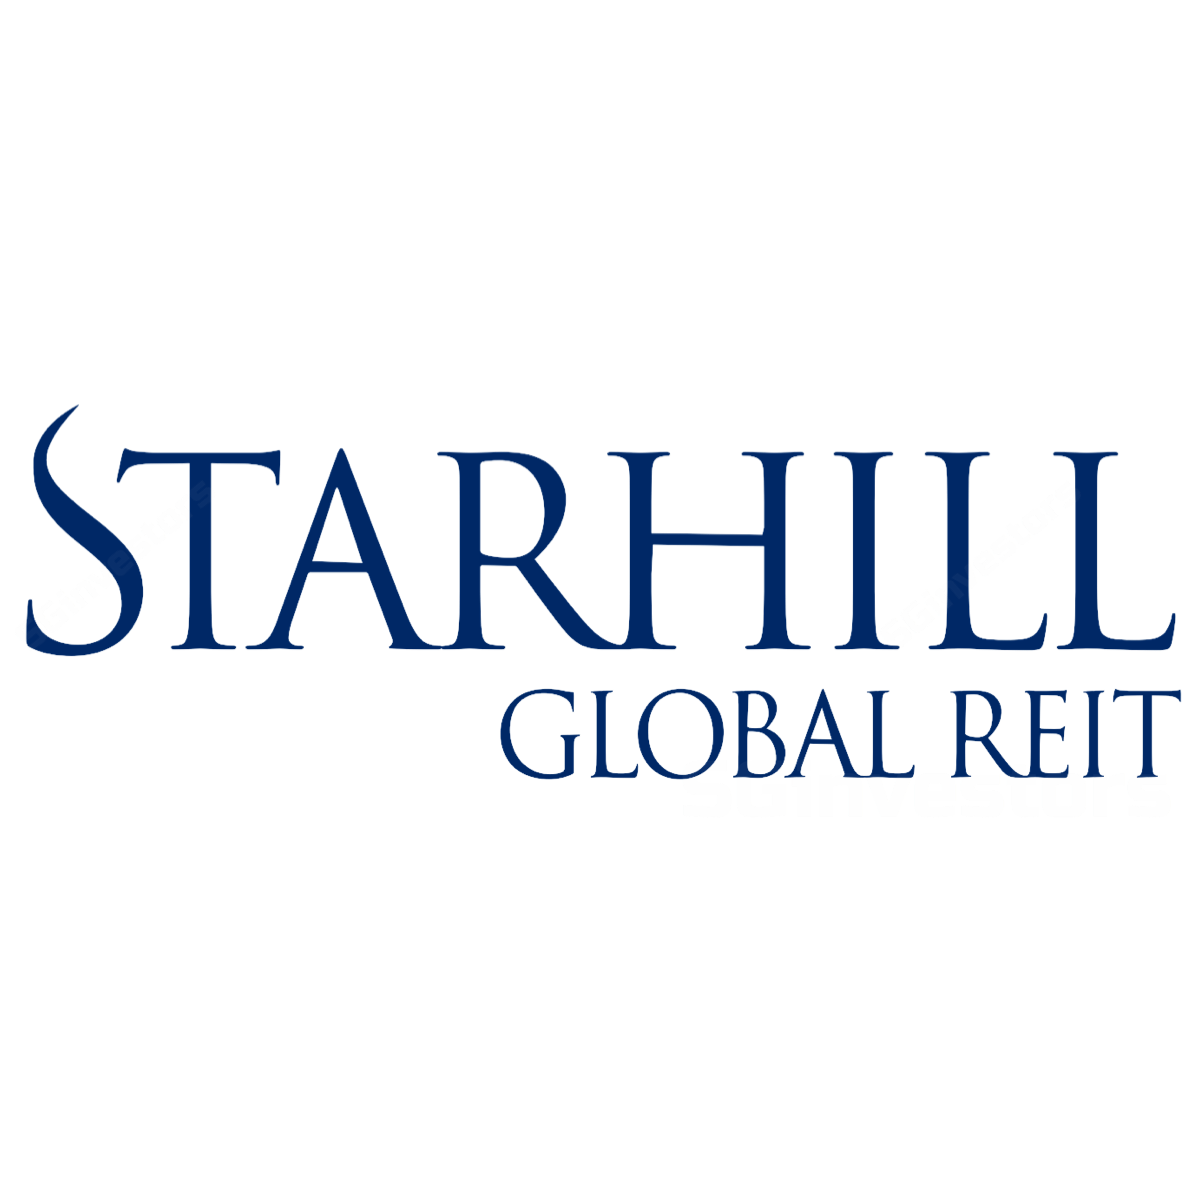 Star hill global reit fundamental analysis forex real estate investing programs software